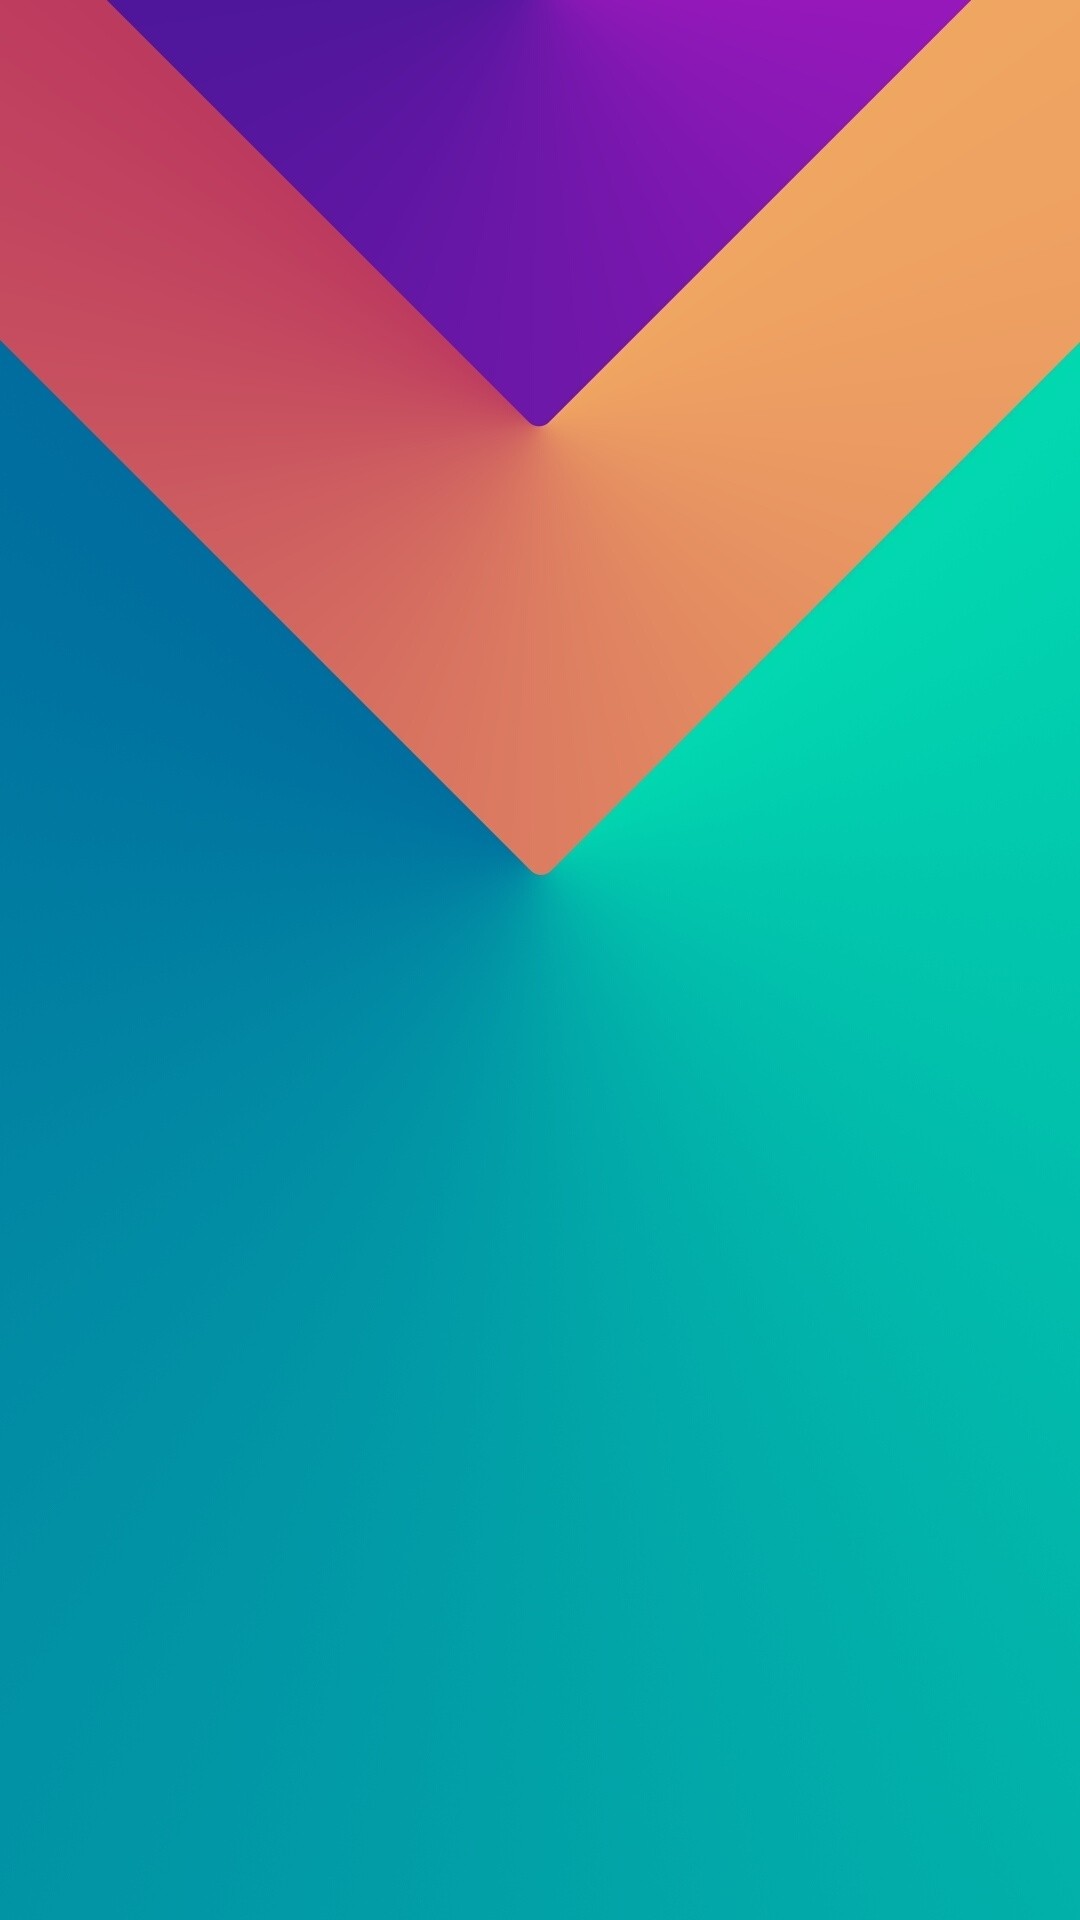 Download MIUI 9 Stock Wallpapers Right Here!